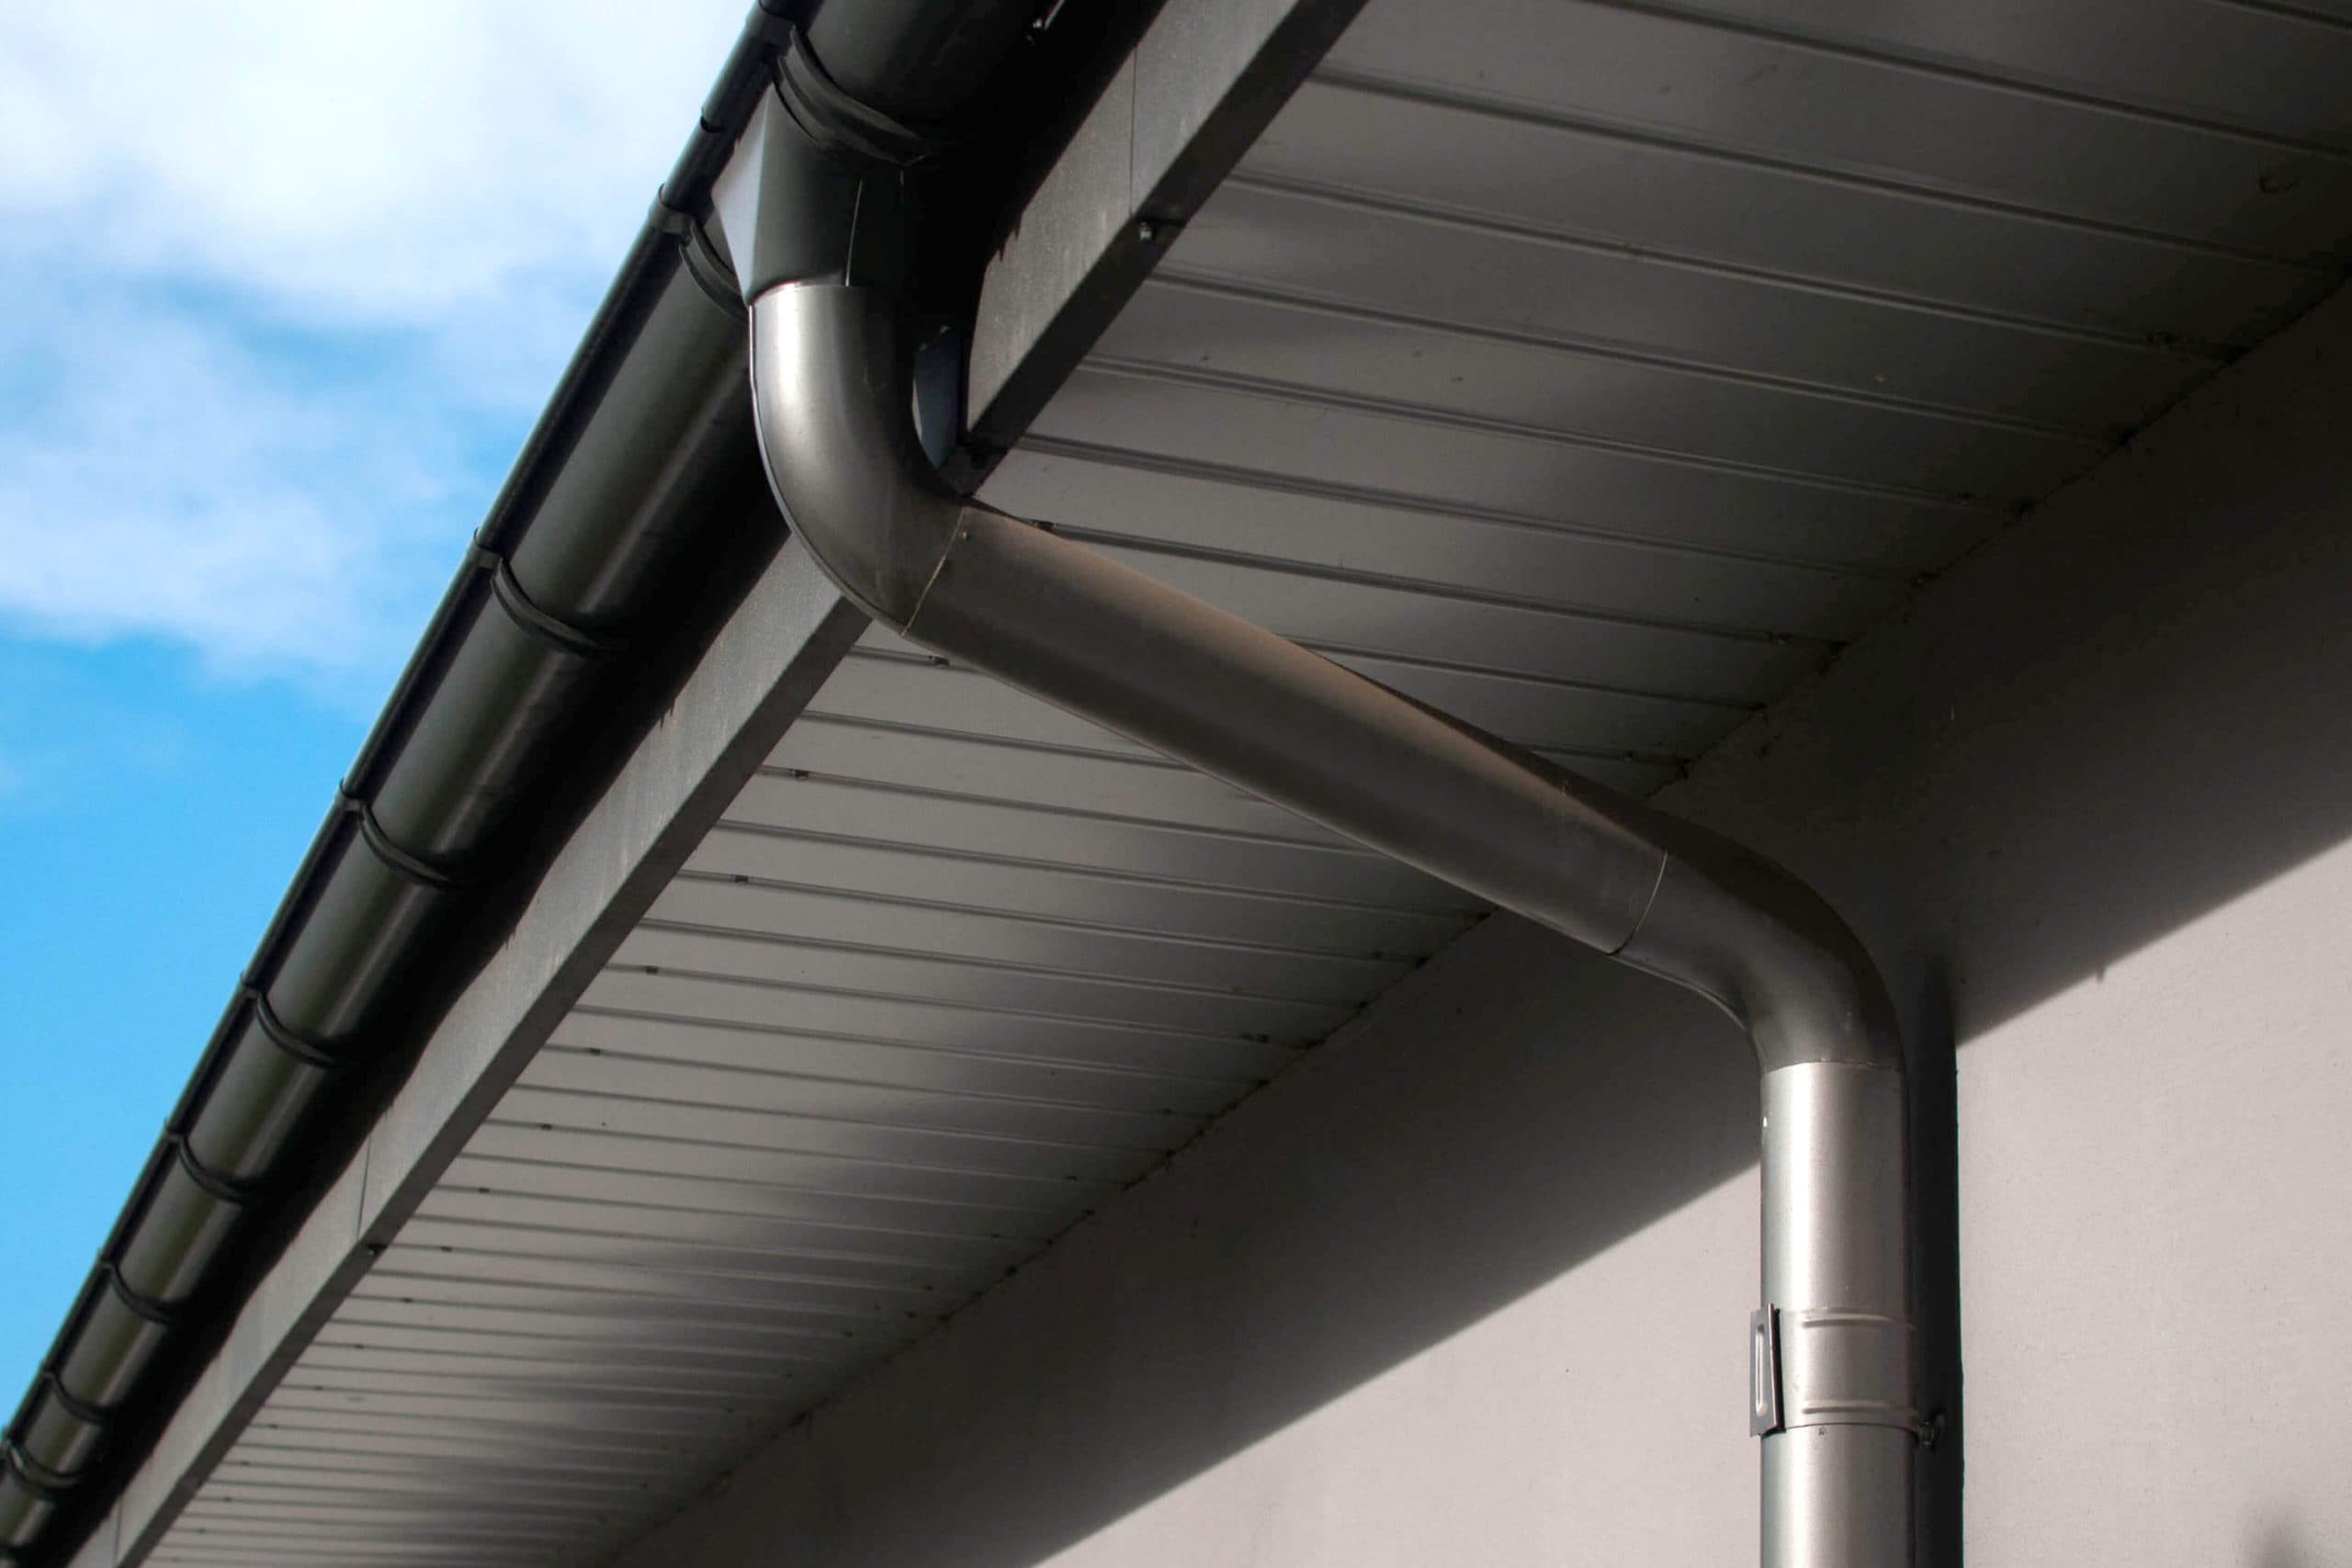 Reliable and affordable Galvanized gutters installation in Concord